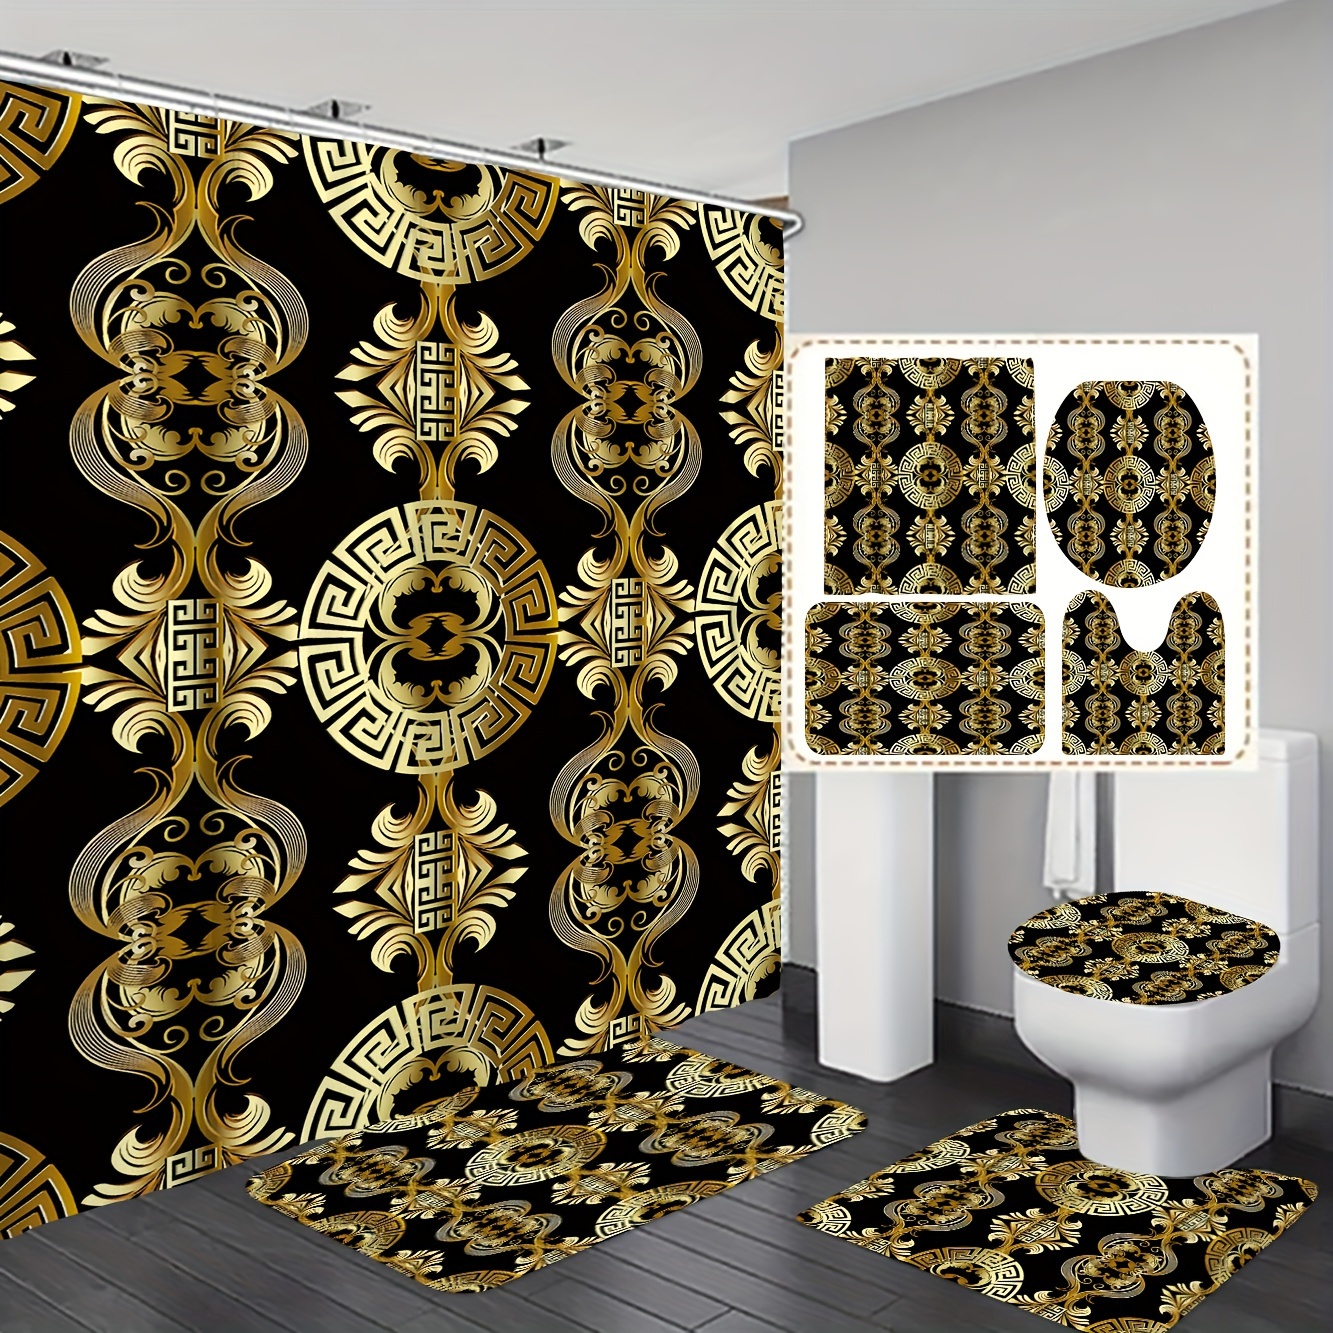 

1/3/4pcs Vintage Gold Pattern Bathroom Set, Including 1 Fabric Shower Curtain (70.8x70.8 Inches) And 2/3 Toilet Mat/rug Covers, Elegant European Style, Waterproof, With 12 Free Hooks For Home Decor